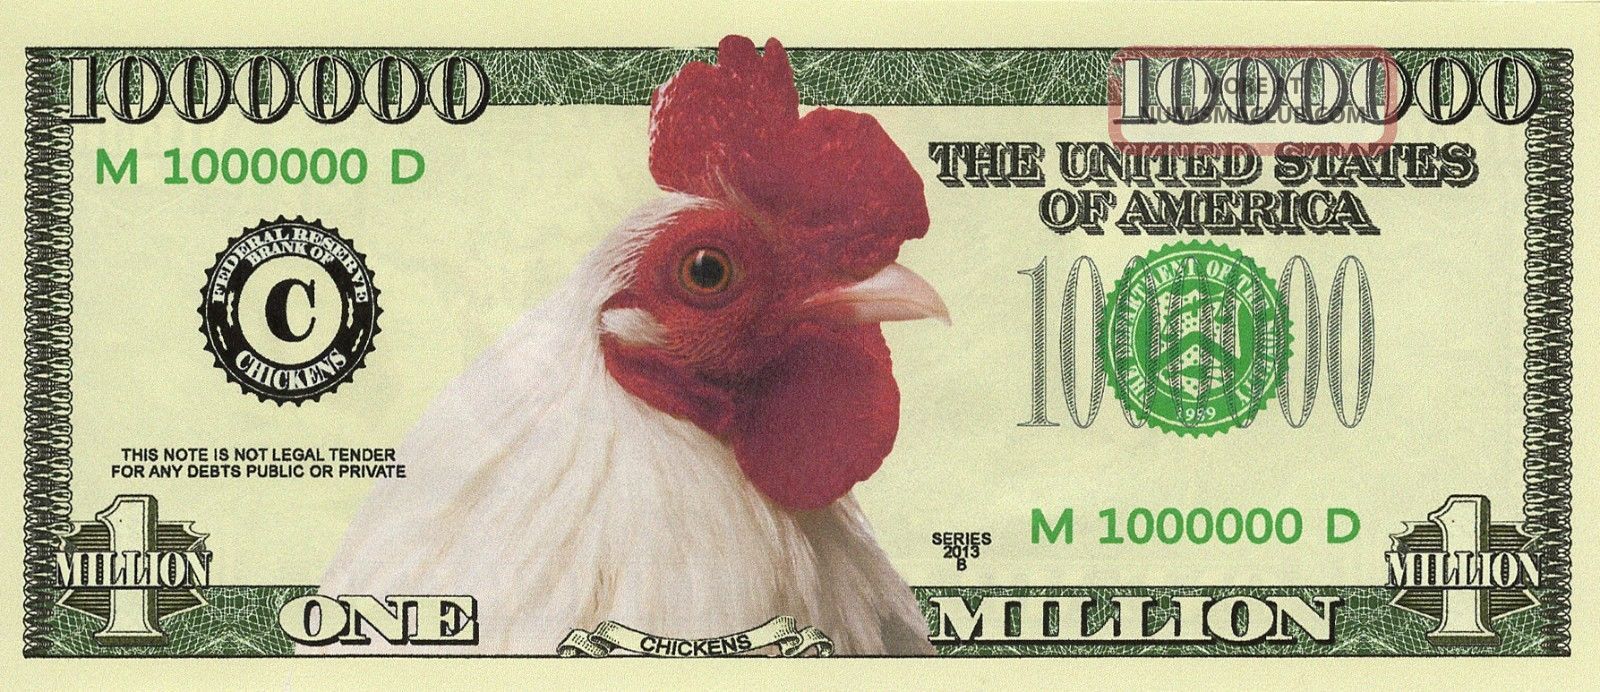 Lot of 100 BILLS Rooster Million Dollar Bill 2017 Year of the Rooster